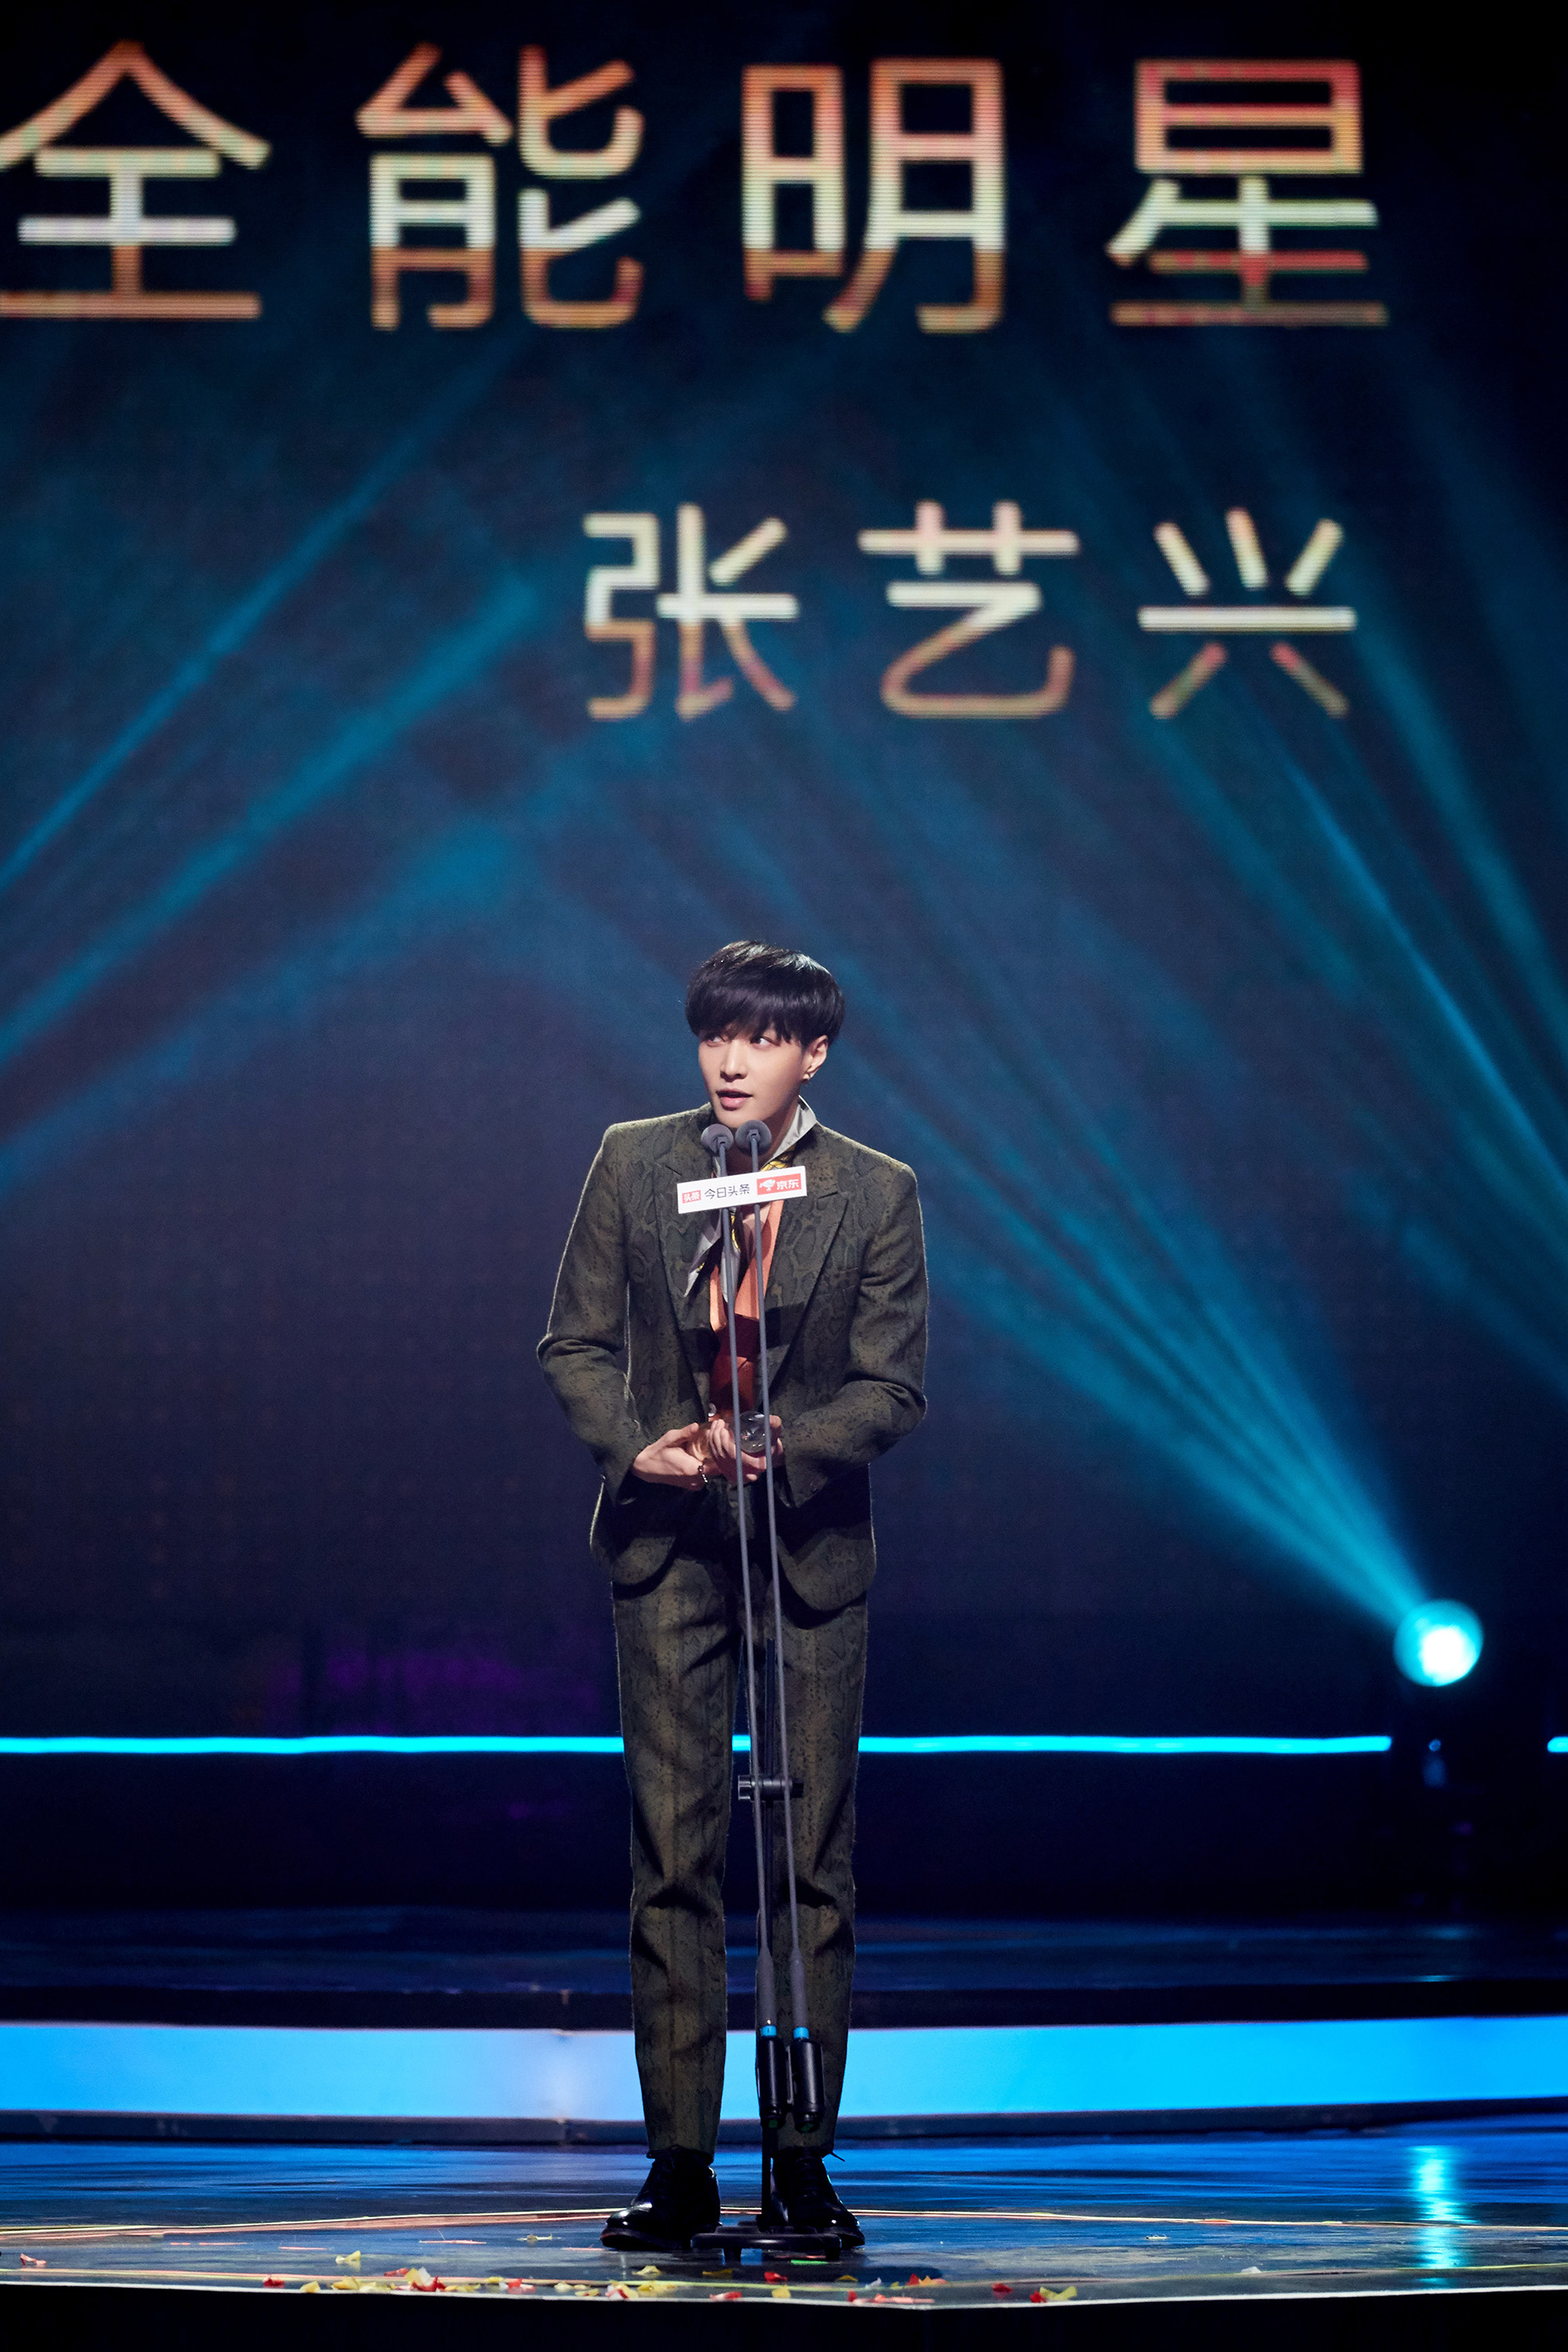 EXO Lay (a member of SM Entertainment) has swept up various awards ceremonies in China in the new year and is a hot topic.Lay attended the 2019 Weibo Night (2019) held at the Beijing Water Cube on January 11 (local time), won the Best Producer of the Year Award and the Nam Shin of the Year award, making him an overwhelming local popularity once again.The 2019 Weibo Night, which marks its 10th anniversary, is an awards ceremony hosted by Chinas largest SNS Weibo. It invites a star who has been hot for a year. Lay has been selected as a winner in 2019 for his outstanding production skills, visuals, popularity, and topicality.In addition, Lay received the All-Star of the Year award at the 2019 ByteDance Year Festival (2019) held at the Beijing Cadillac Arena on January 8 (local time), and the ending stage was spectacularly decorated with the hit song NAMANA (Namana), which received a heated response from more than 5,000 viewers who visited the scene.The awards ceremony was hosted by ByteDance, which is serving video-sharing application TikTok, and News Application Jinrtouo, and was awarded with a selection of outstanding people and contents that are outstanding in the popular culture world based on big data in the ByteDance platform.The netizens are responding to I congratulate you so much, I am the best, I am proud, I want to see.As a result, Lay was three-time king of 2019 Tencent Music Entertainment Awards held in December last year, followed by the 2nd prize of 2020 Aichi Night of the Shout, the 2nd prize of 2019 Weibo Night and the 2019 ByteDance Yearbook award, total 8 gold medals were recorded at the China end ceremony, proving explosive popularity and high status in the local area.iMBC  Photos SM